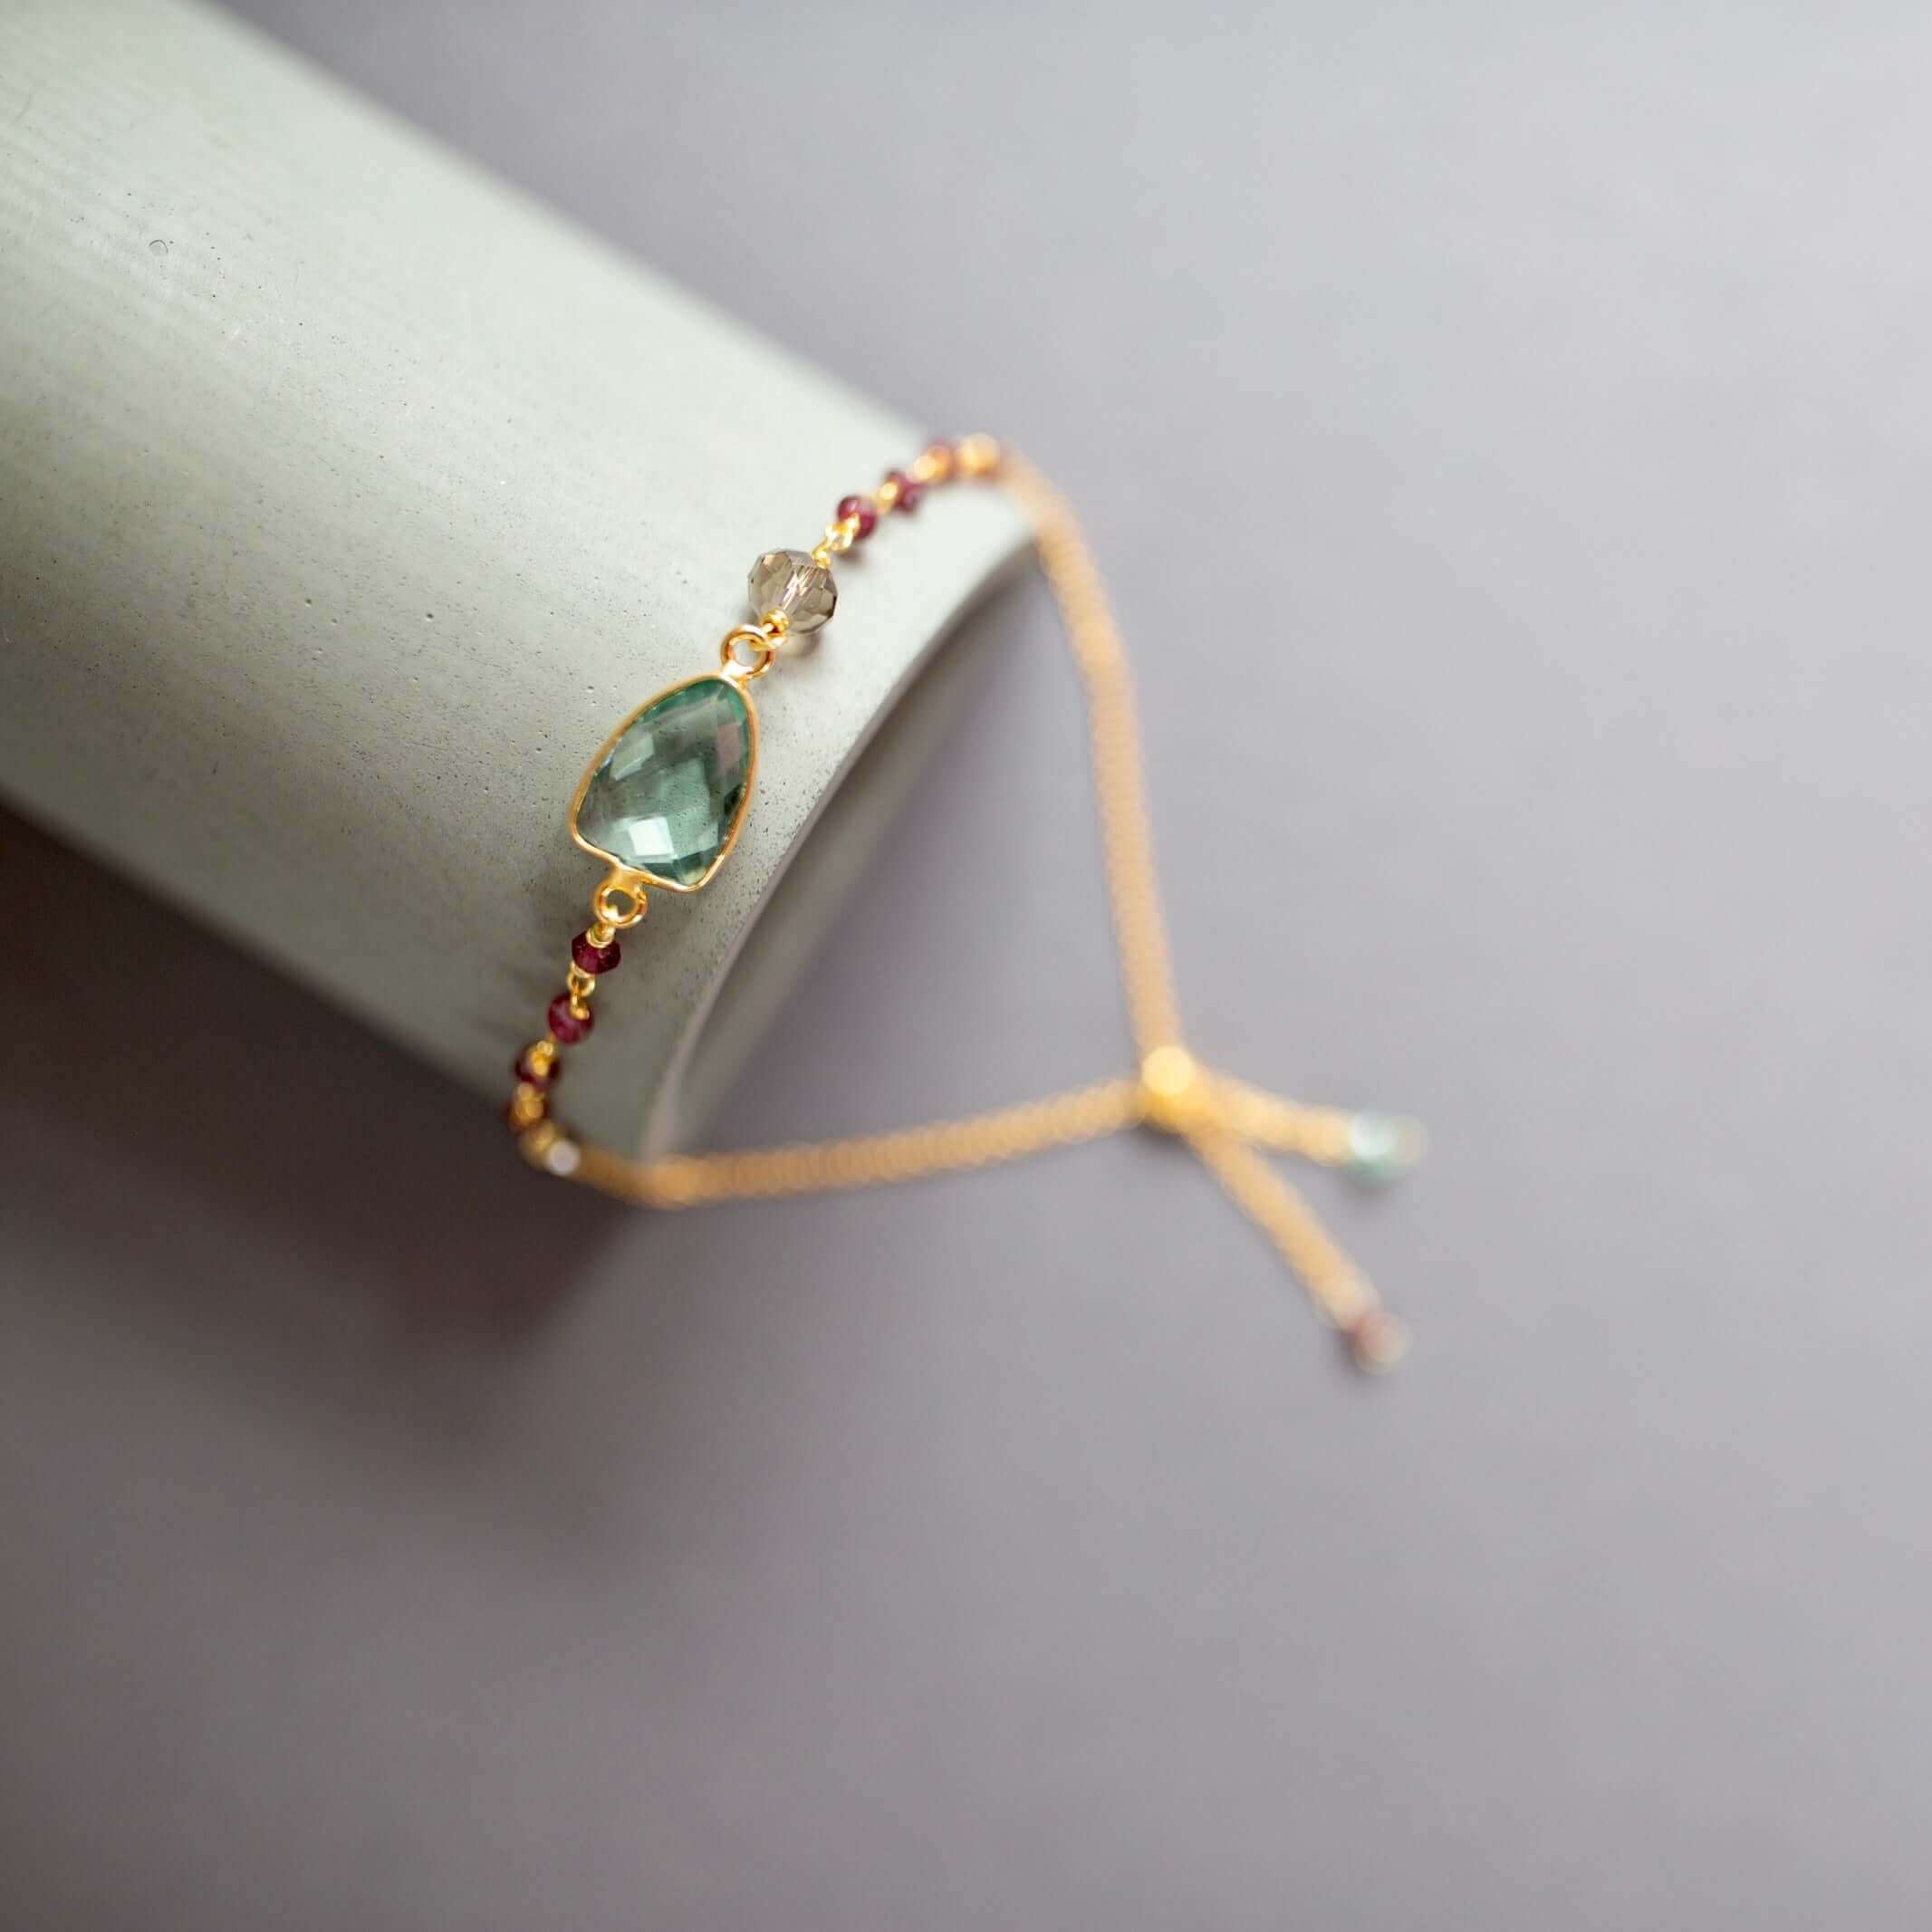 Gold plated Adjustable Bracelet with Green Amethyst Bezel and Tiny Gemstone Accents.  